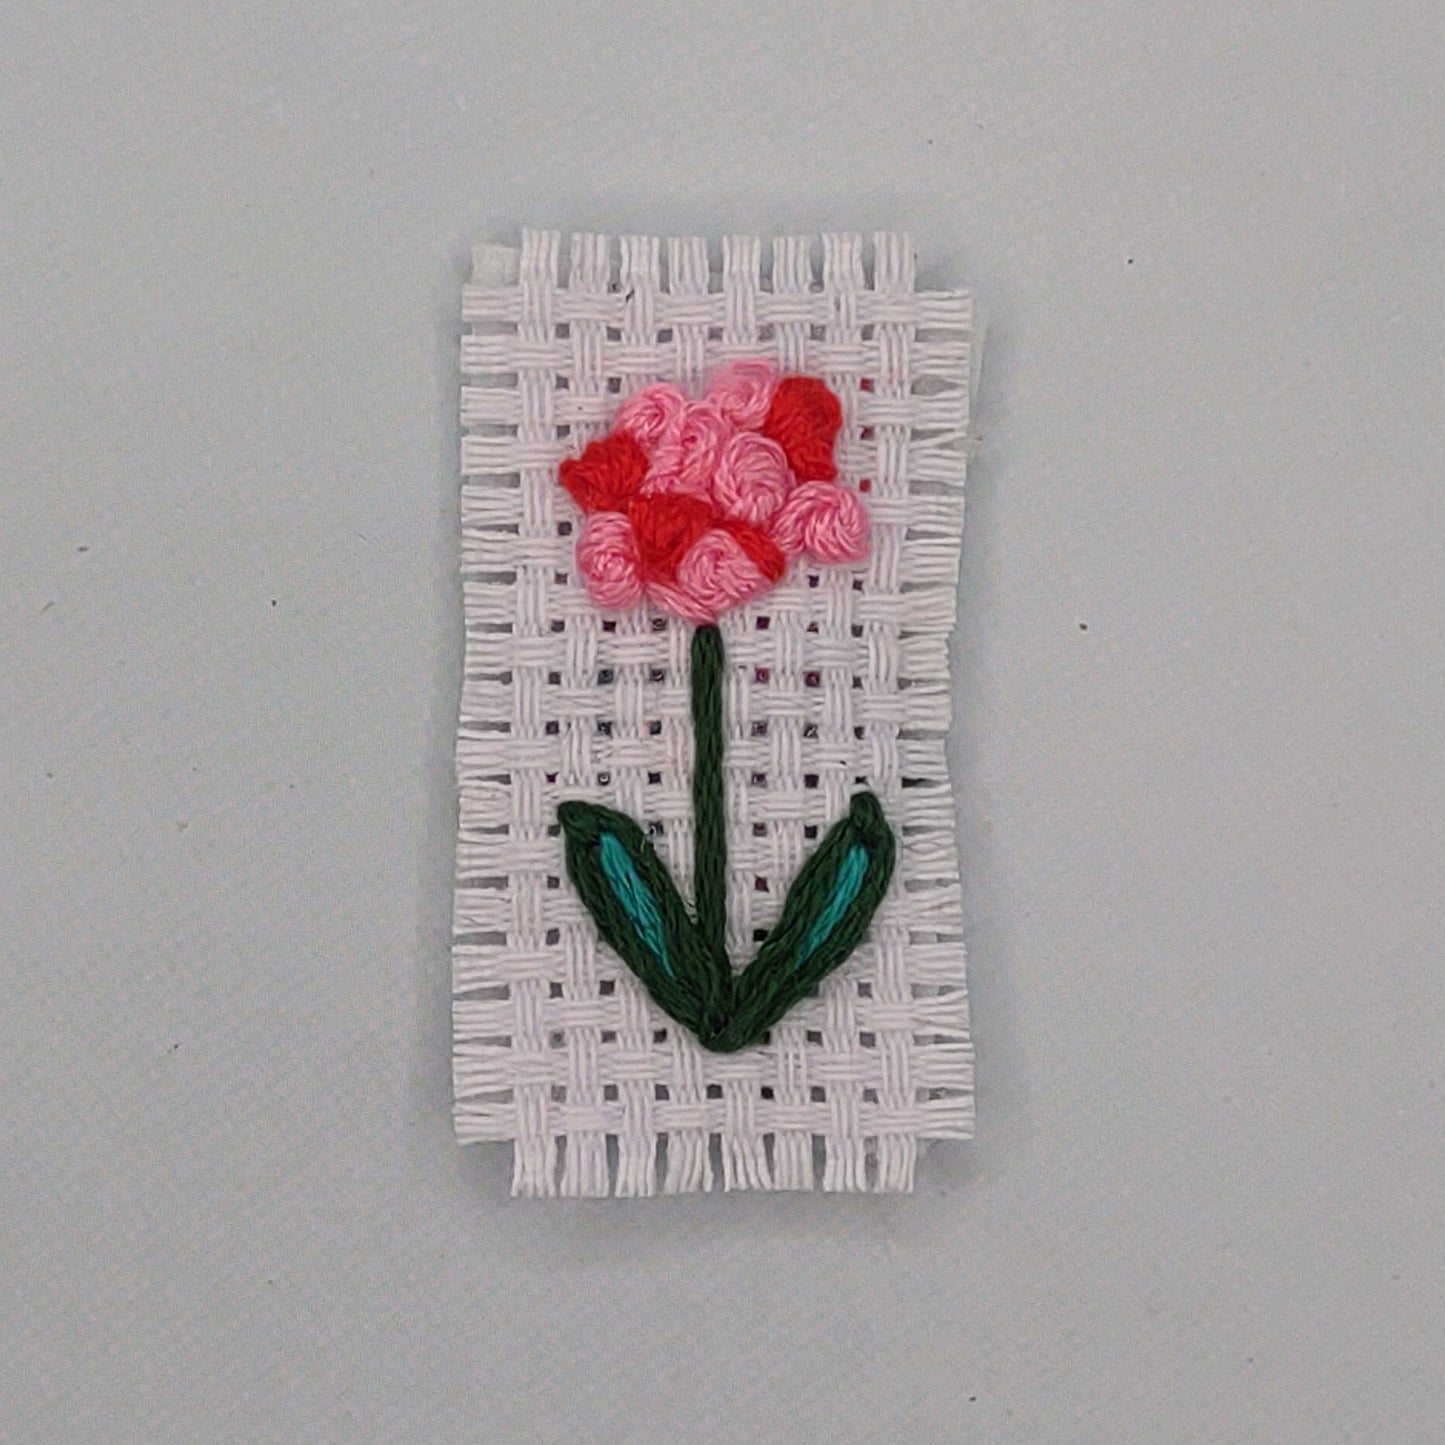 Flower Bouquet- Caring Magnets - Handmade Embroidery